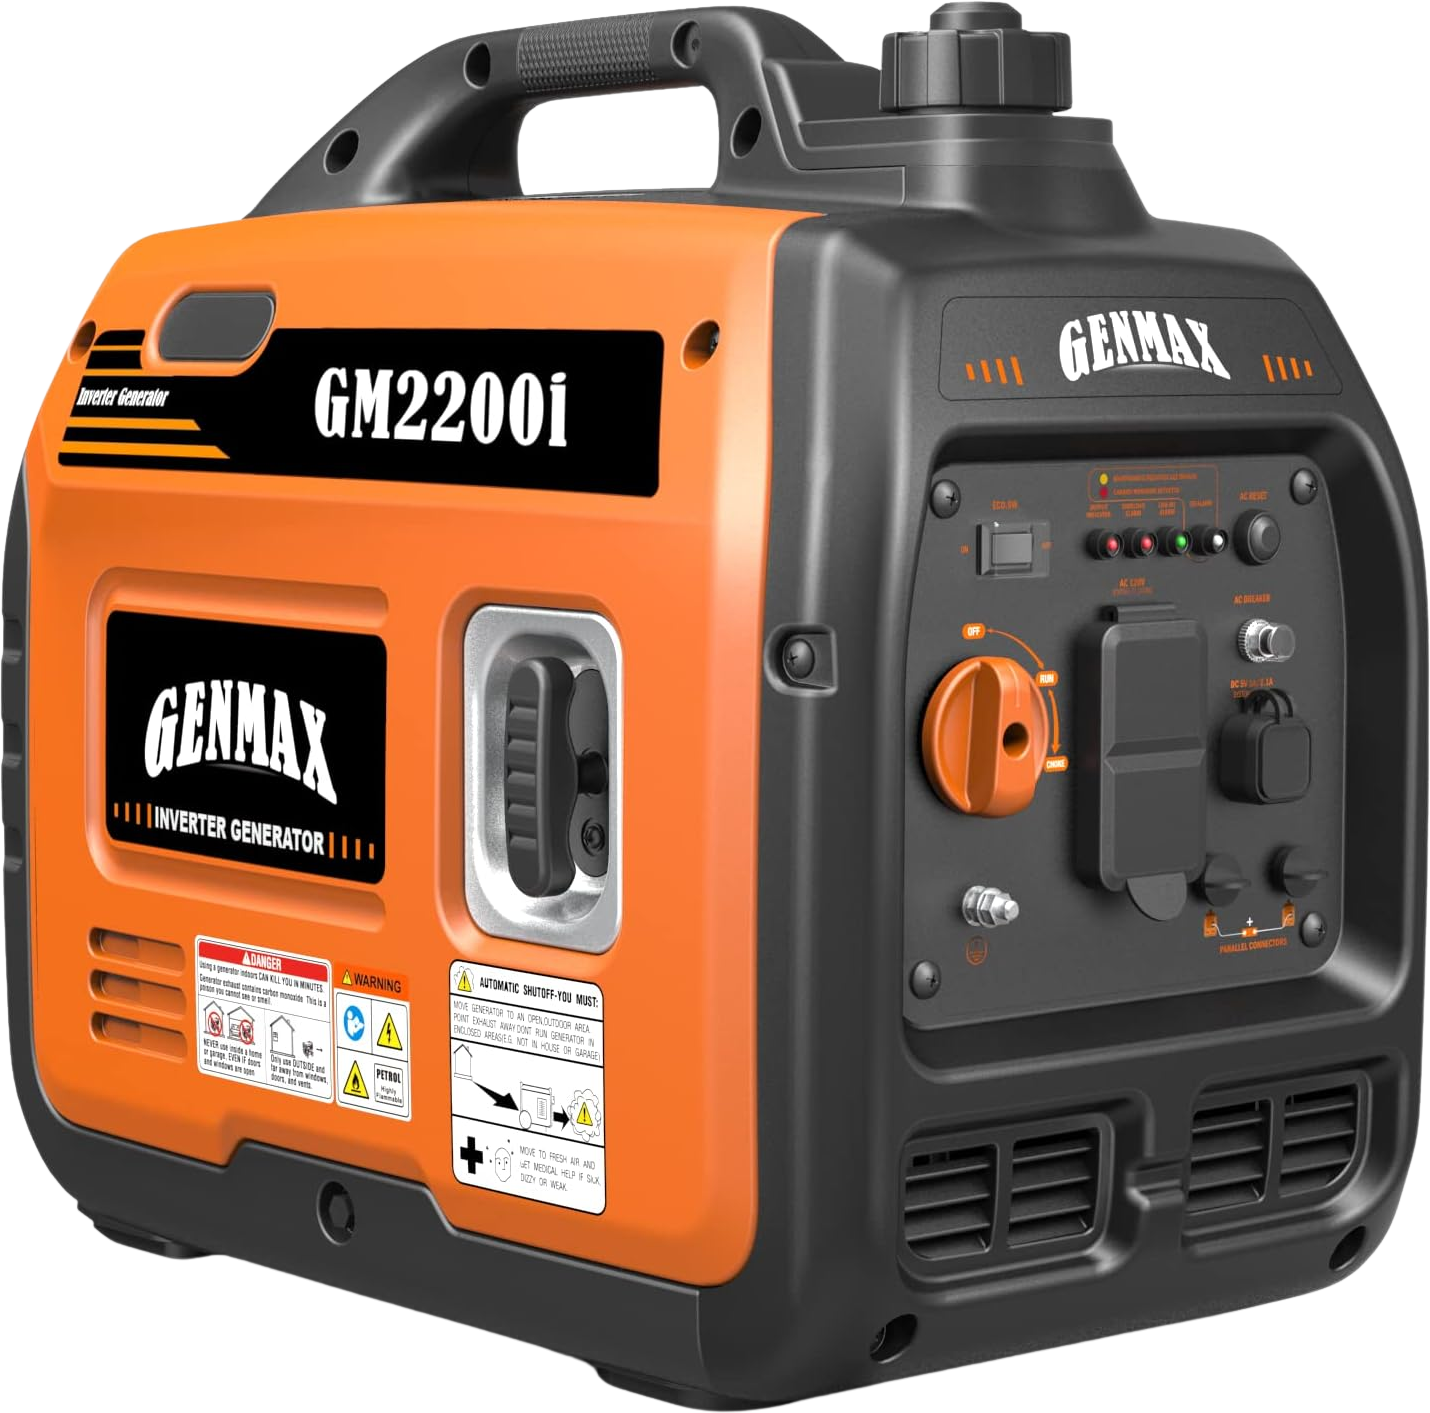 GENMAX, GENMAX GM2200i 20 Amp 1800W/2200W Gas Inverter Generator with CO Detect Parallel Ready New